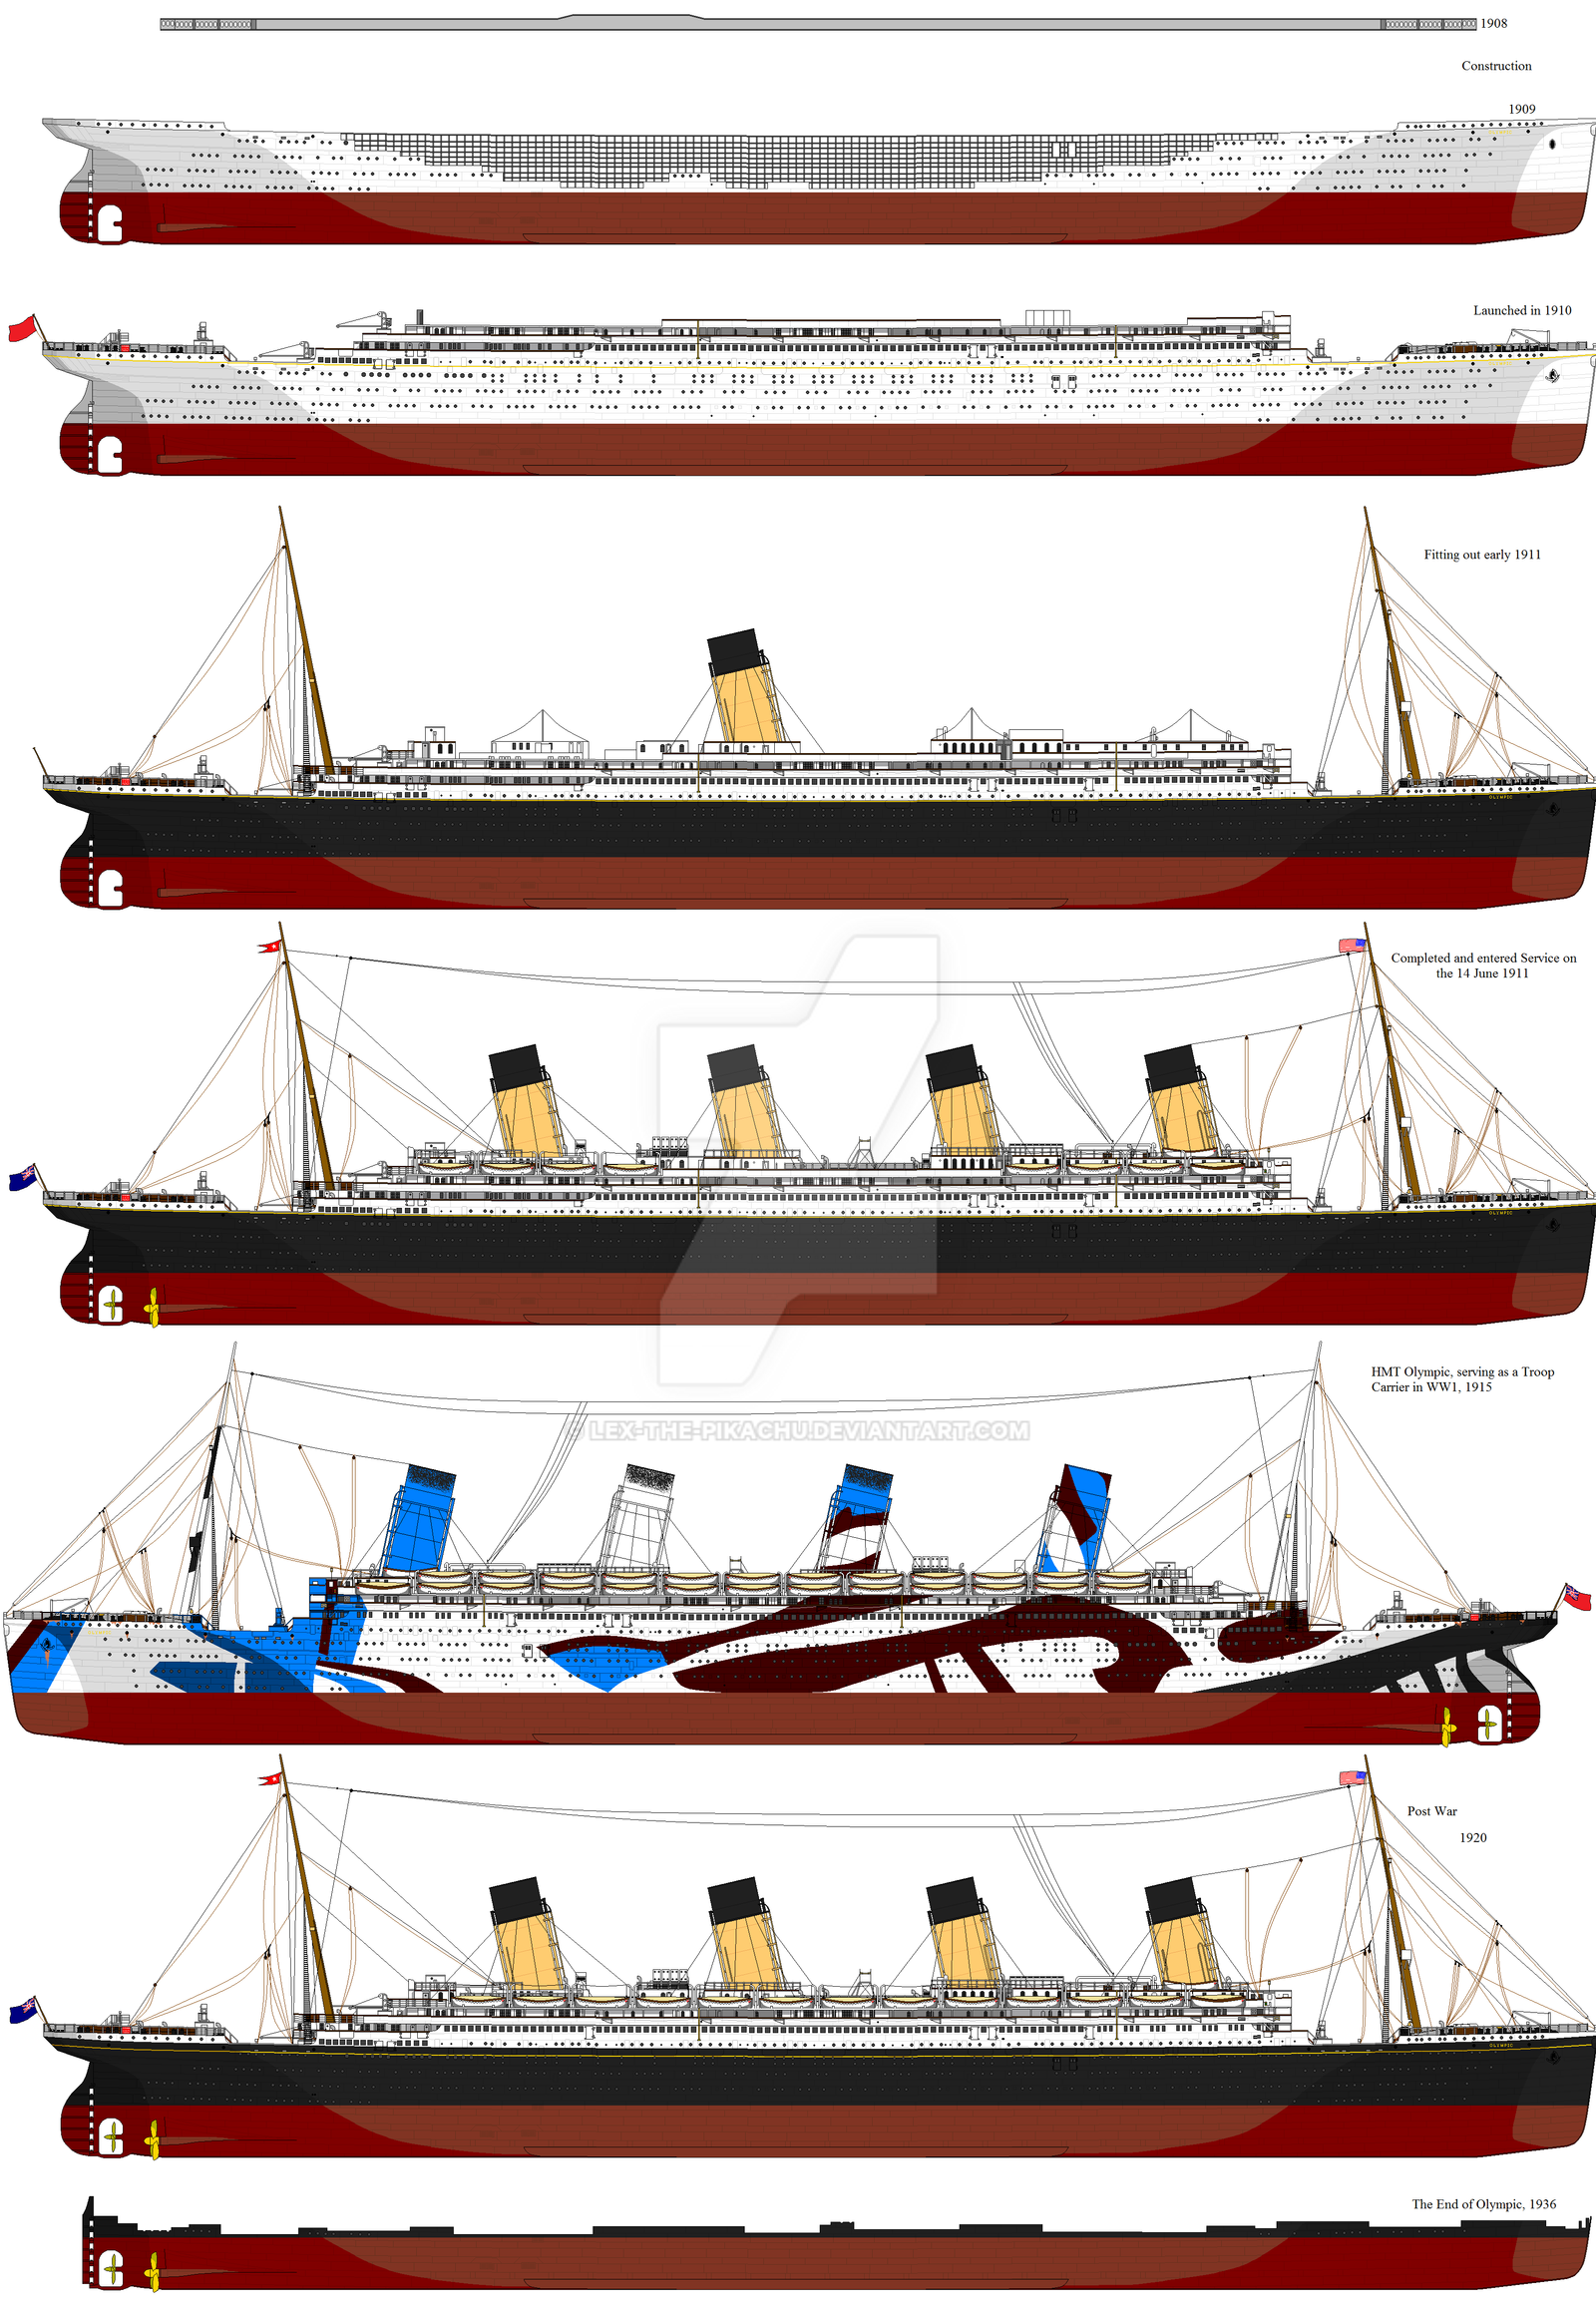 The Life of RMS Olympic by Crystal-Eclair on DeviantArt